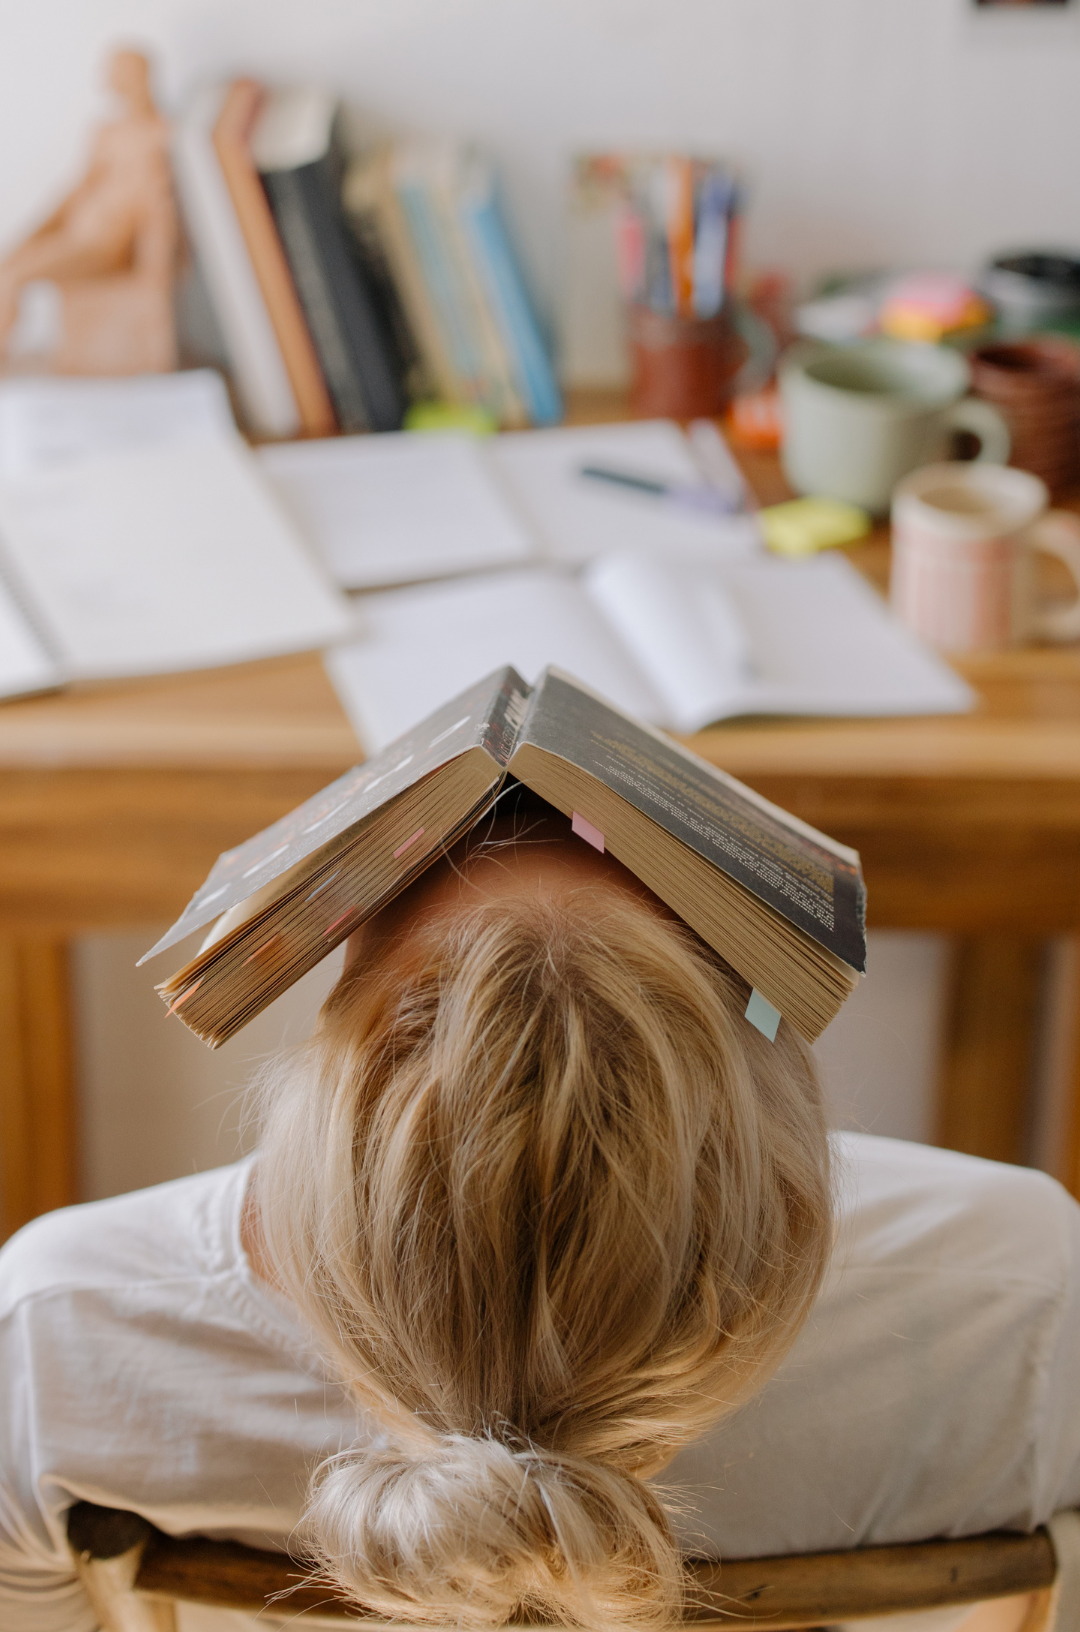 Woman lies back in chair with book covering her face in front of a cluttered desk.